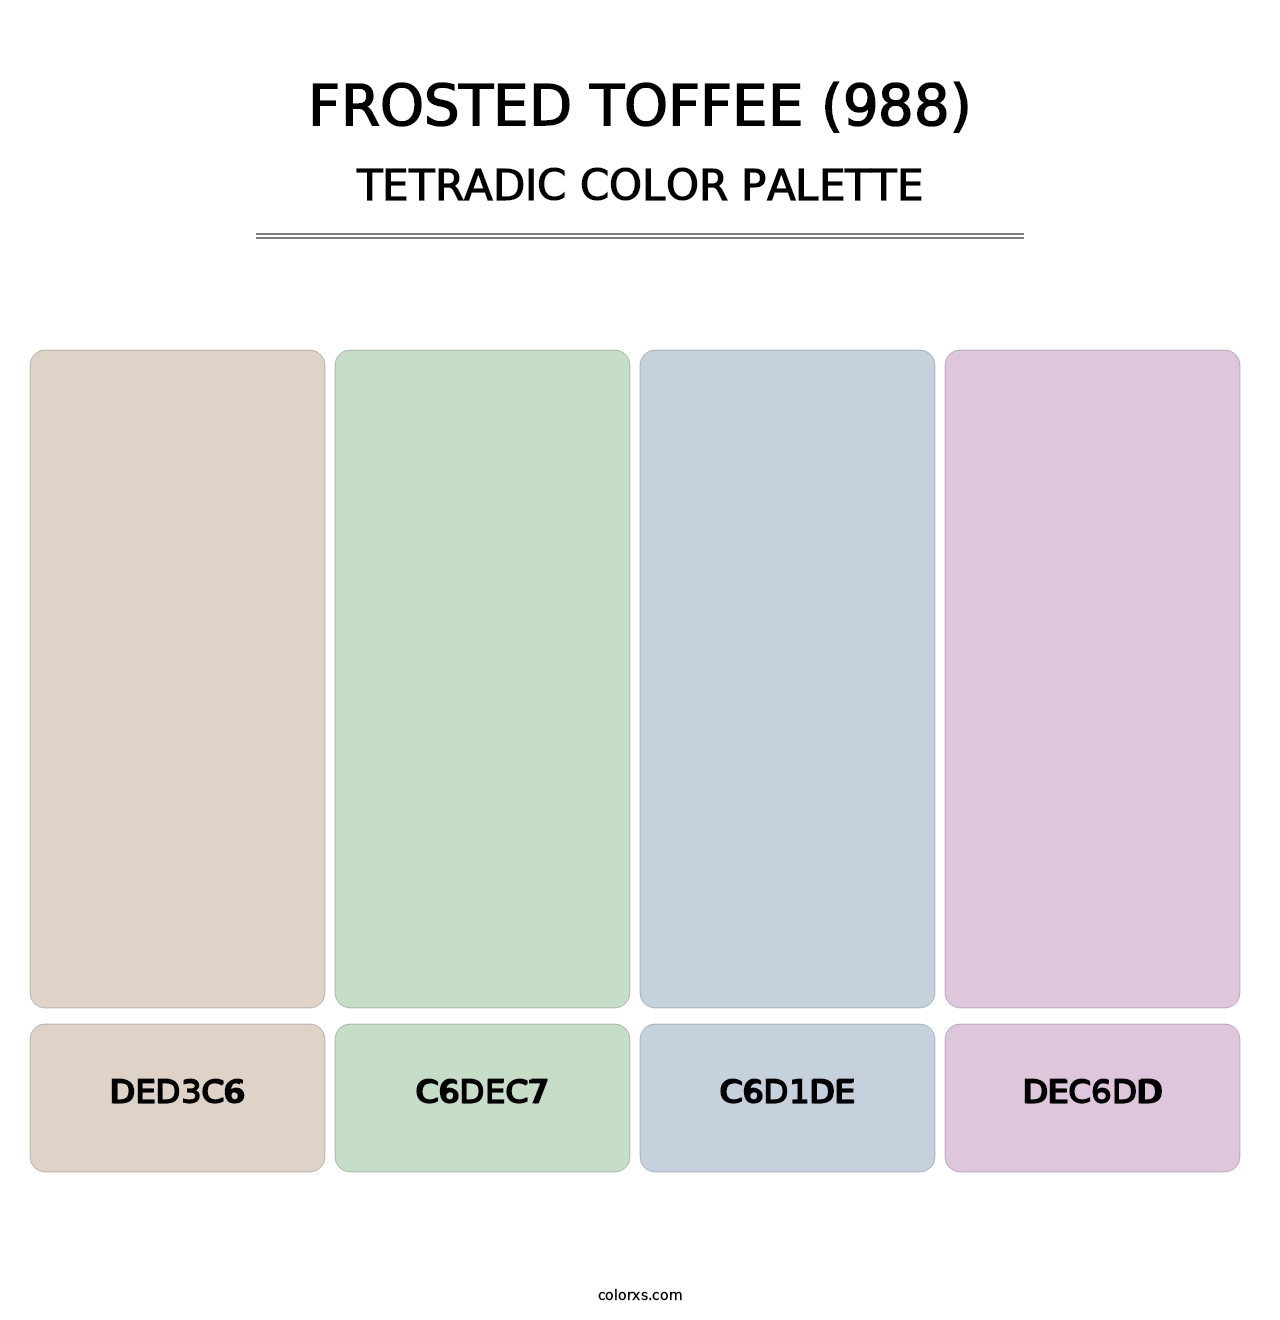 Frosted Toffee (988) - Tetradic Color Palette